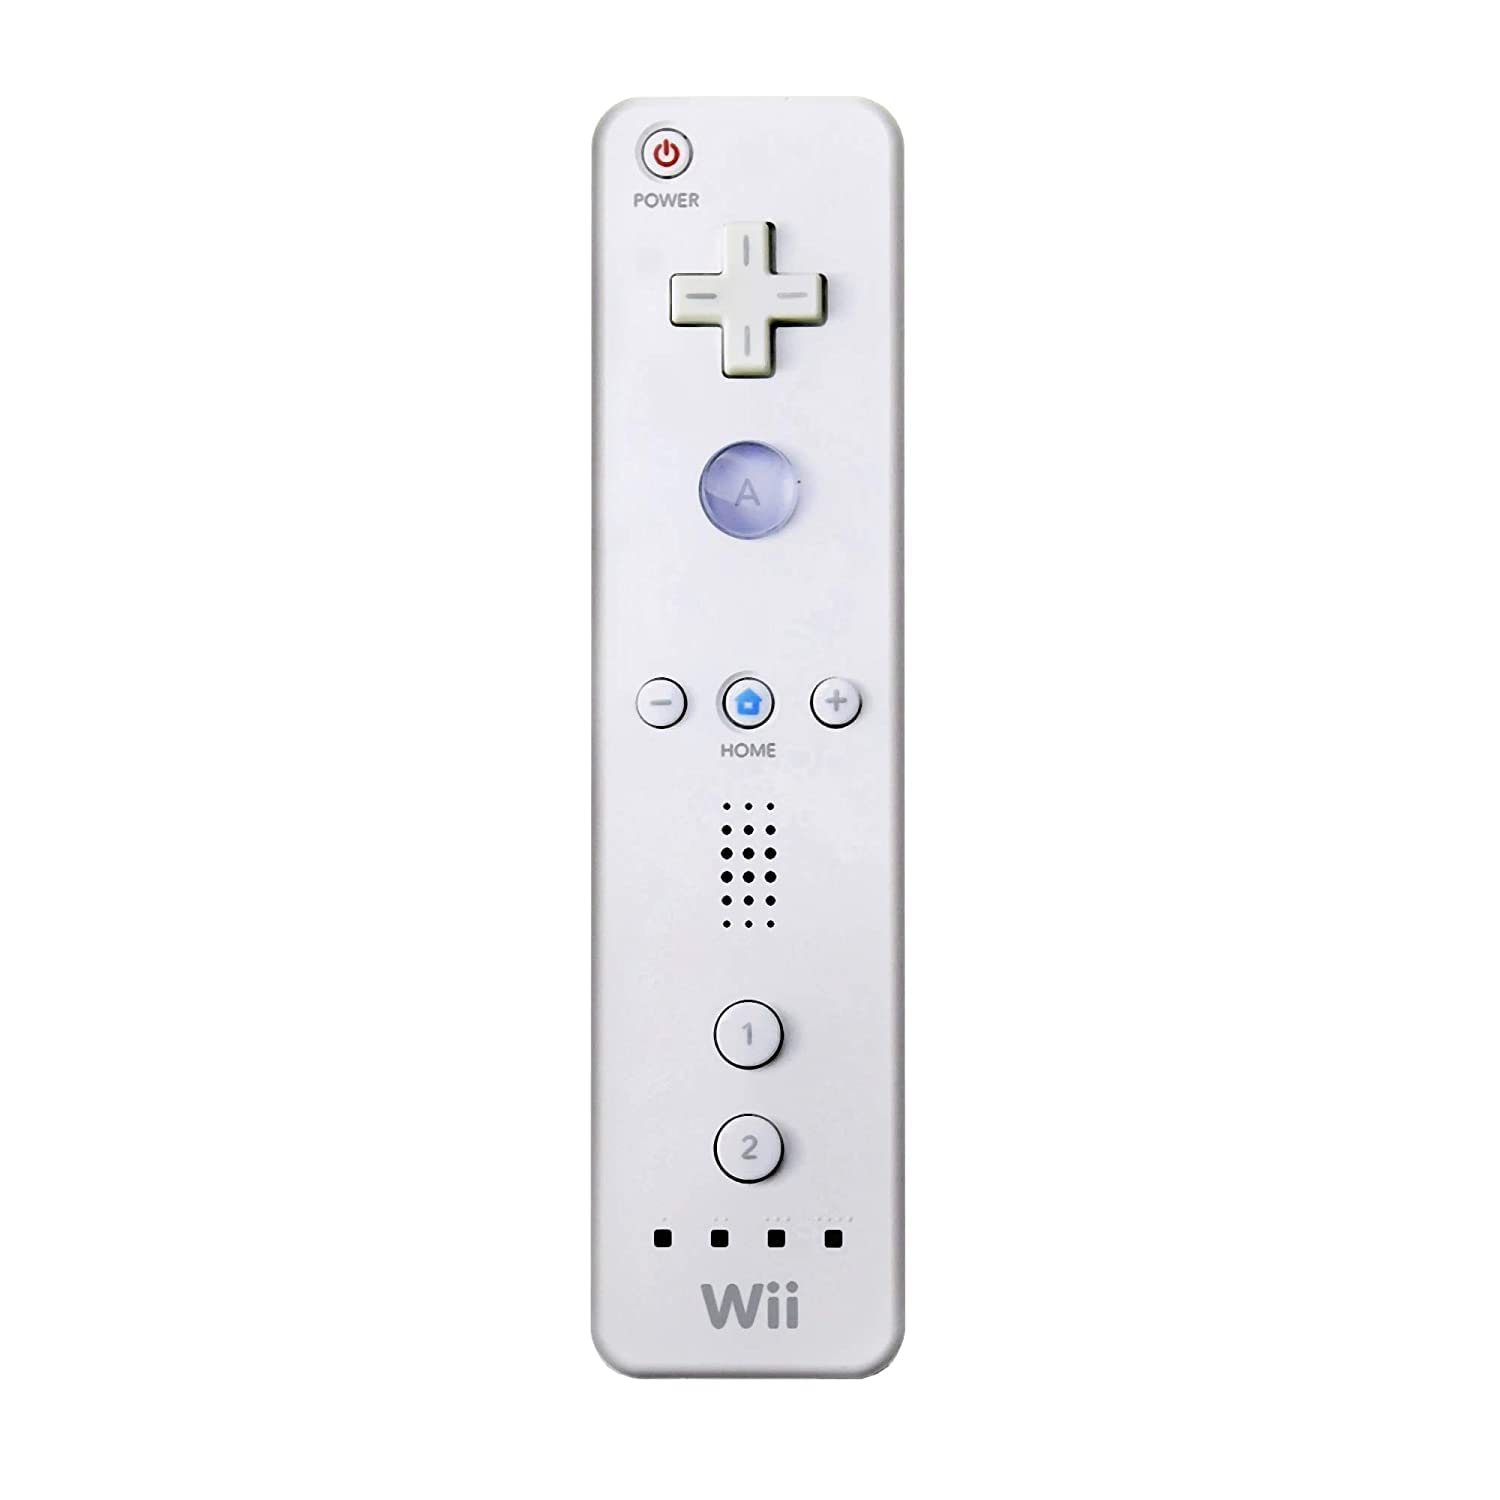 Official Nintendo Wii Remote Controller White